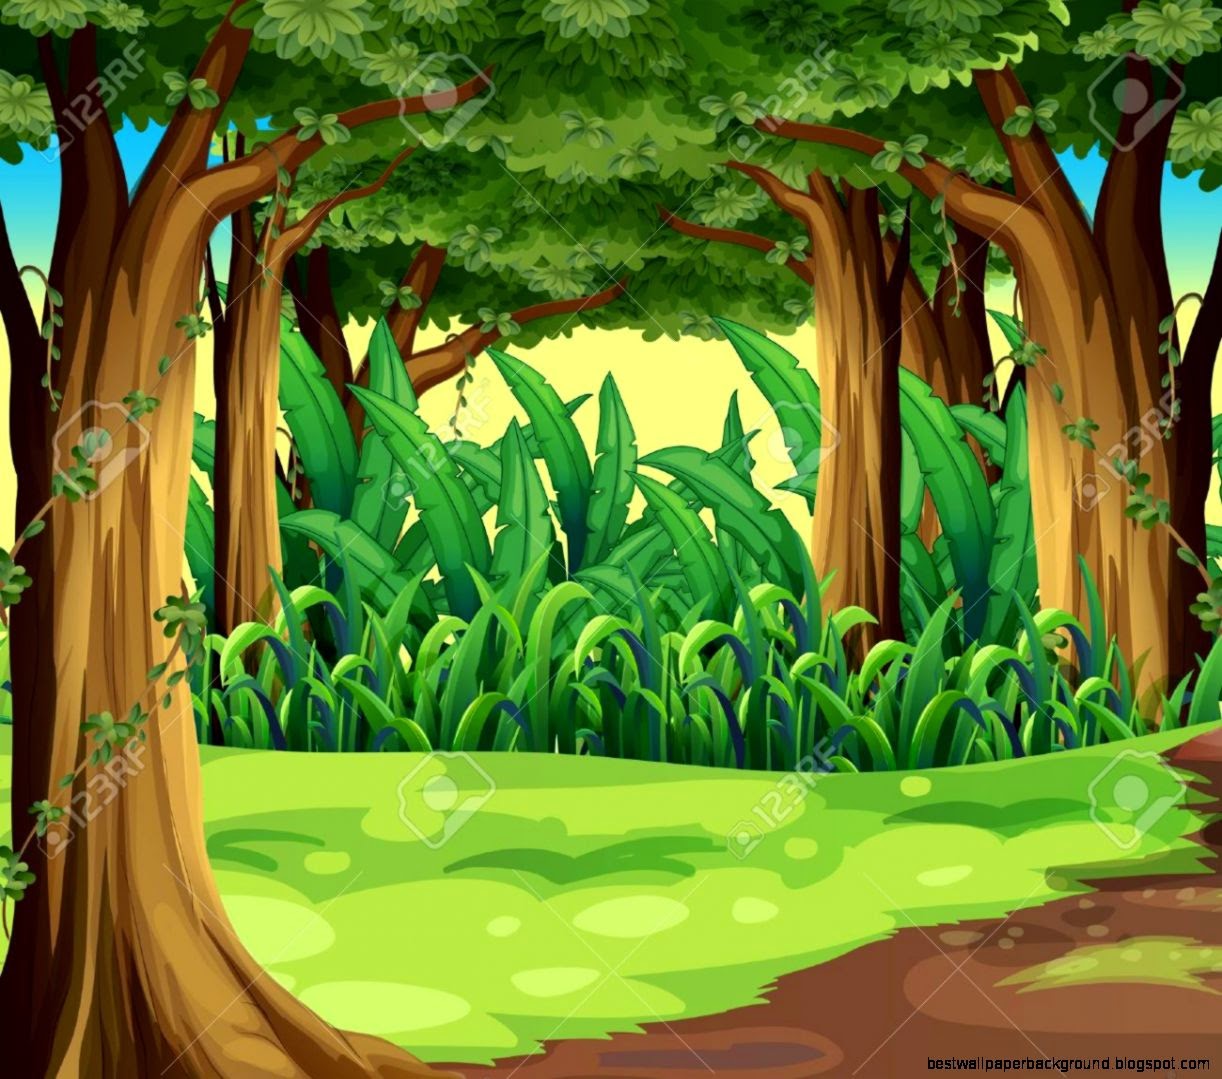 Animated Jungle Backgrounds | Best Wallpaper Background